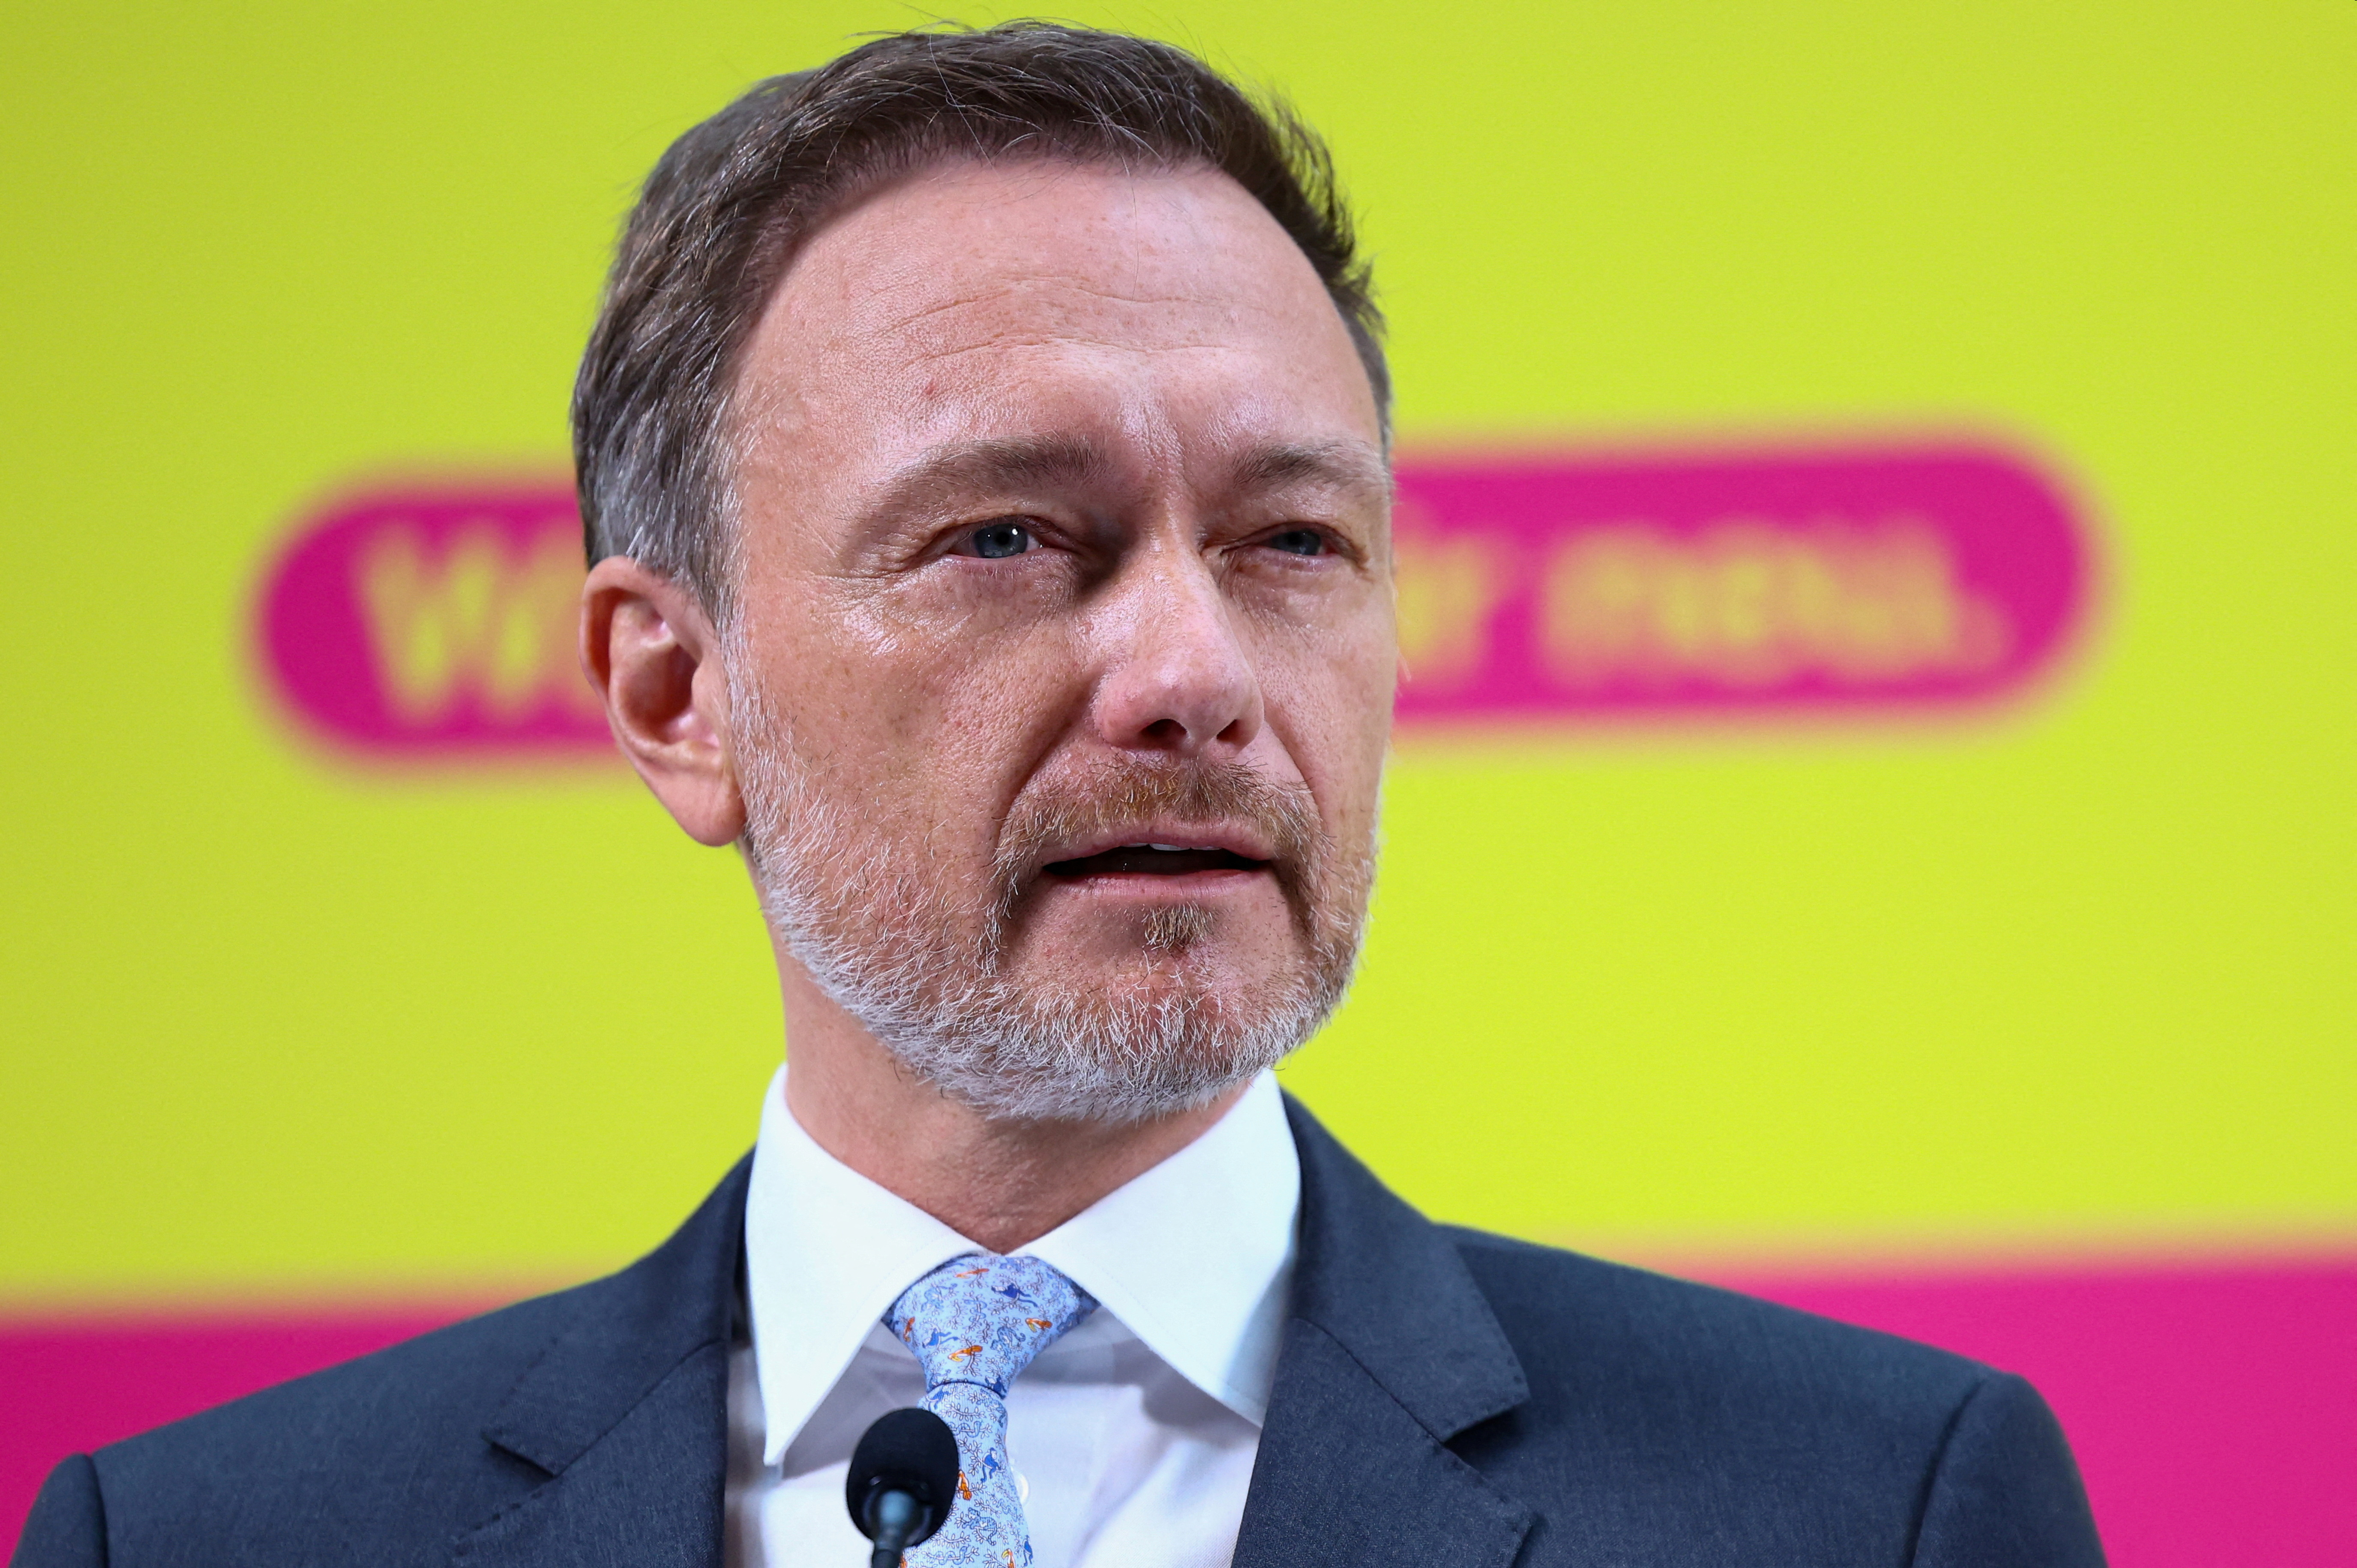 News conference of FDP after state elections in Berlin